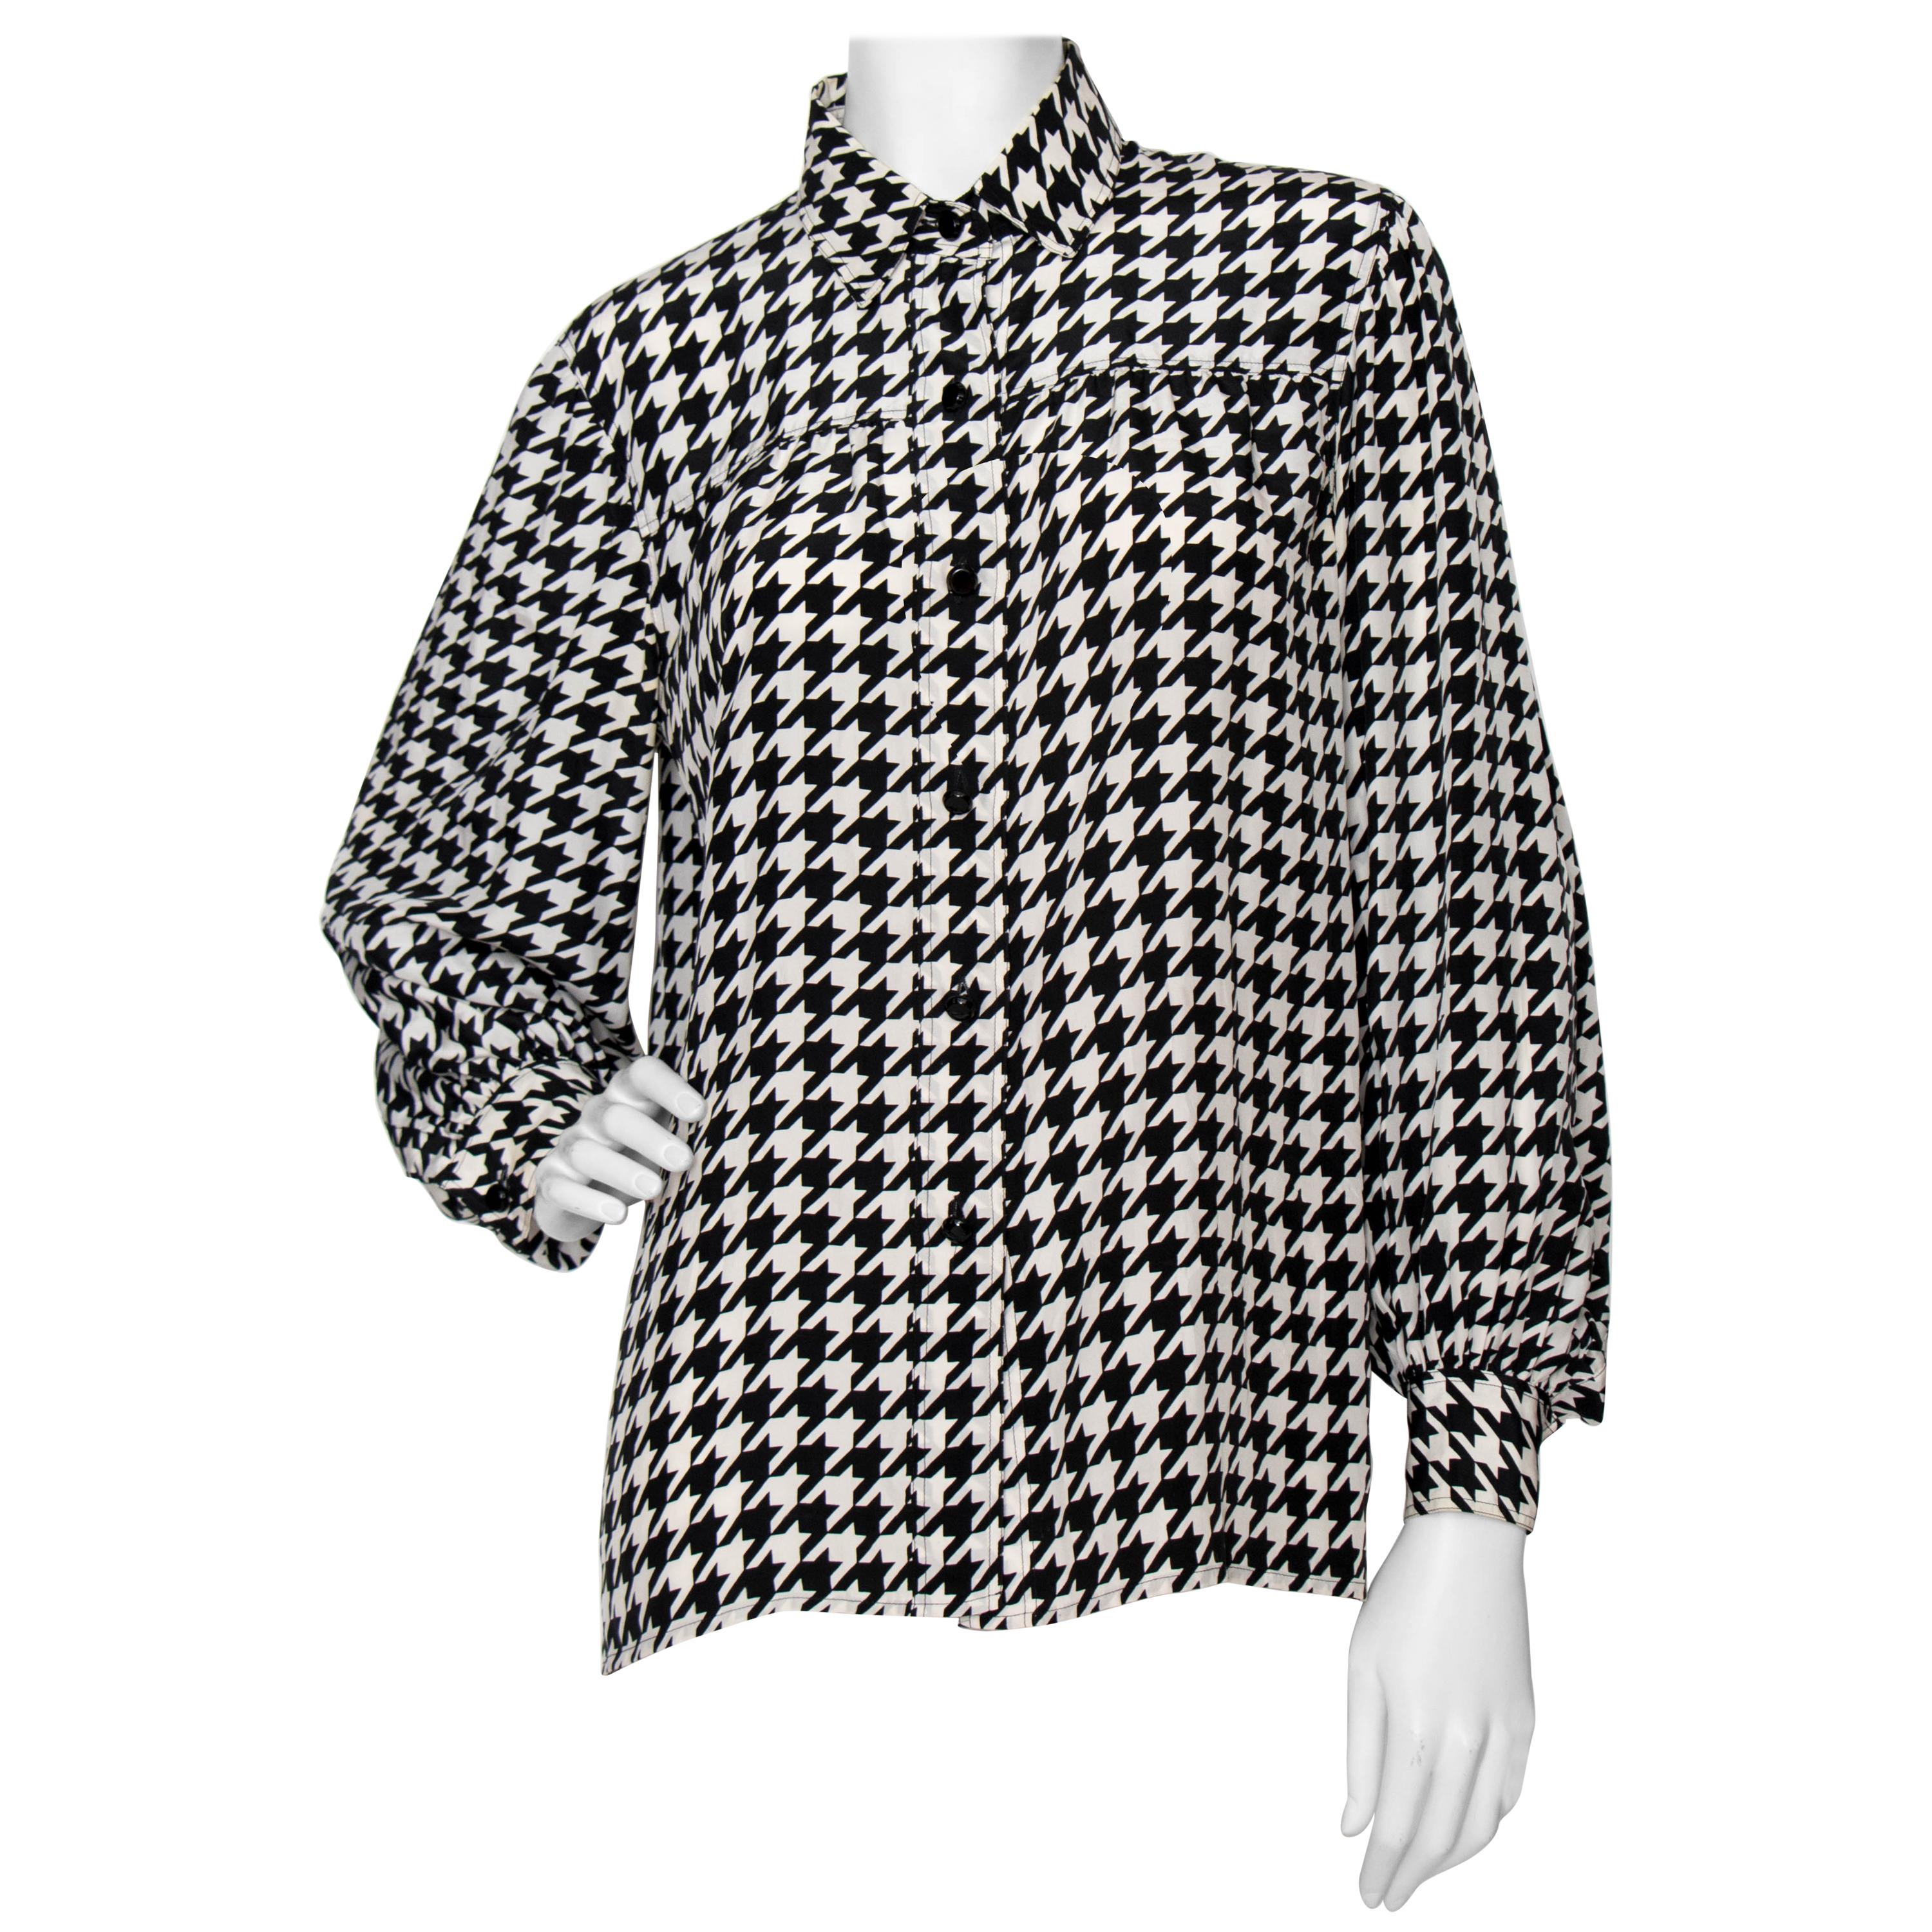 Coco Chanel Shirt - 34 For Sale on 1stDibs